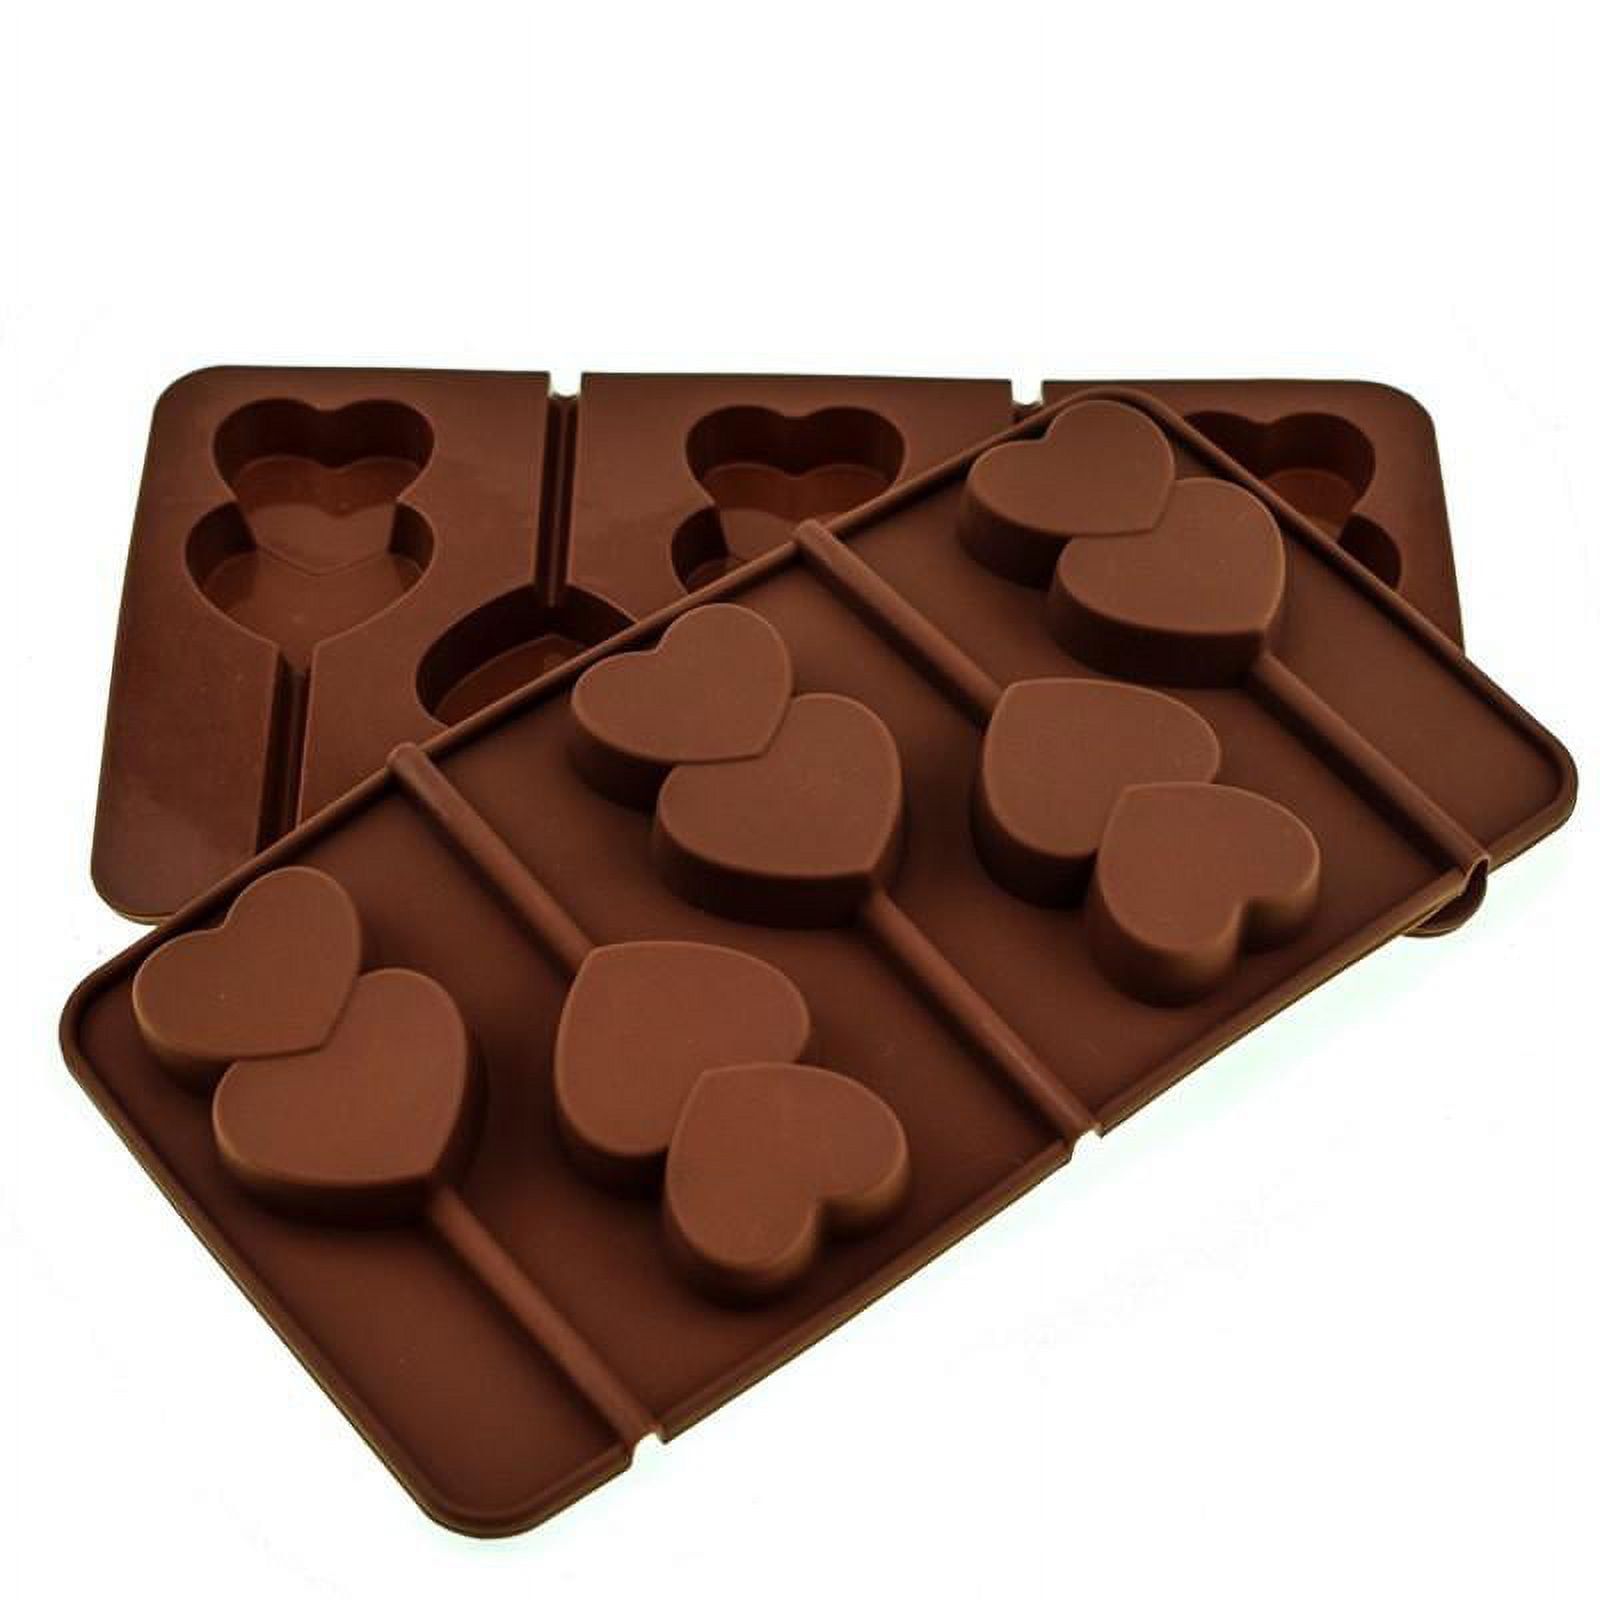 KRLIFCSL Candy Molds Ice Cube Trays Chocolate Molds, Silicone Molds  Including Cactus, Flamingo, Coconut Tree & Pineapple for Making Ice, Jelly